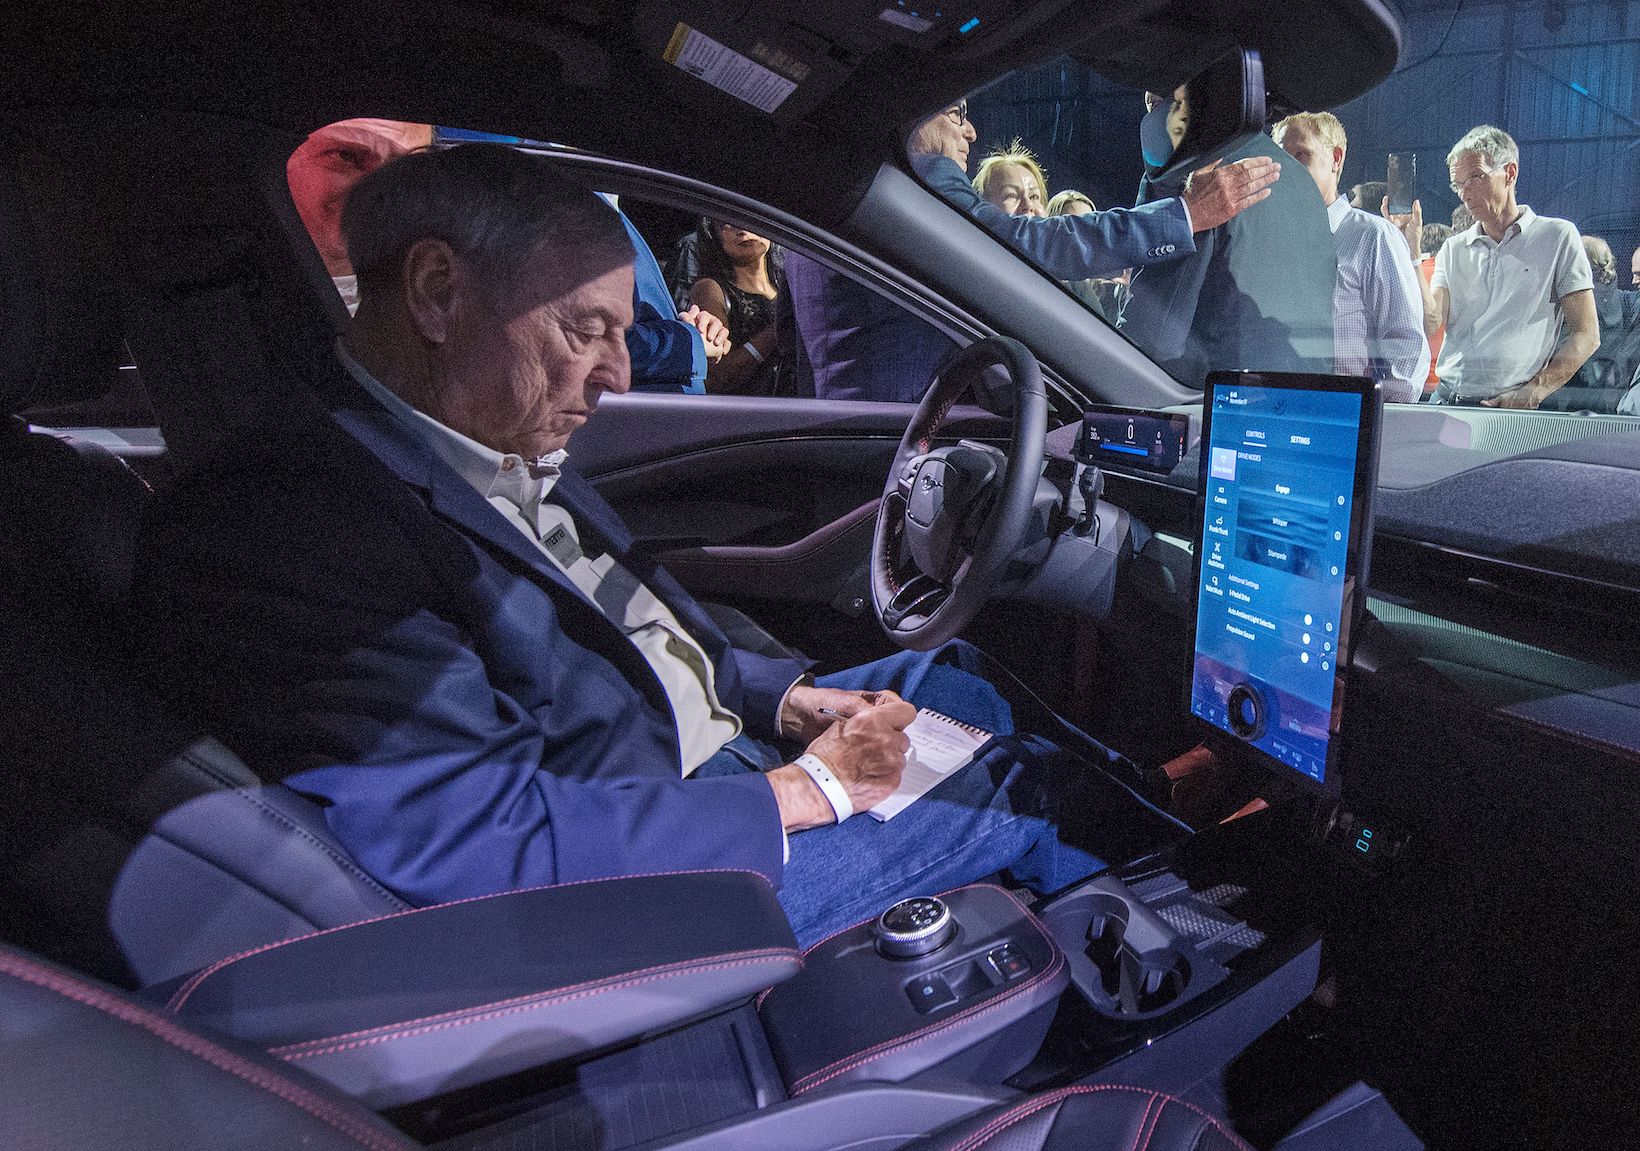 The interior of Ford's first mass-market electric car the Mustang Mach-E, which is an all-electric vehicle that bears the name of the company's iconic muscle car